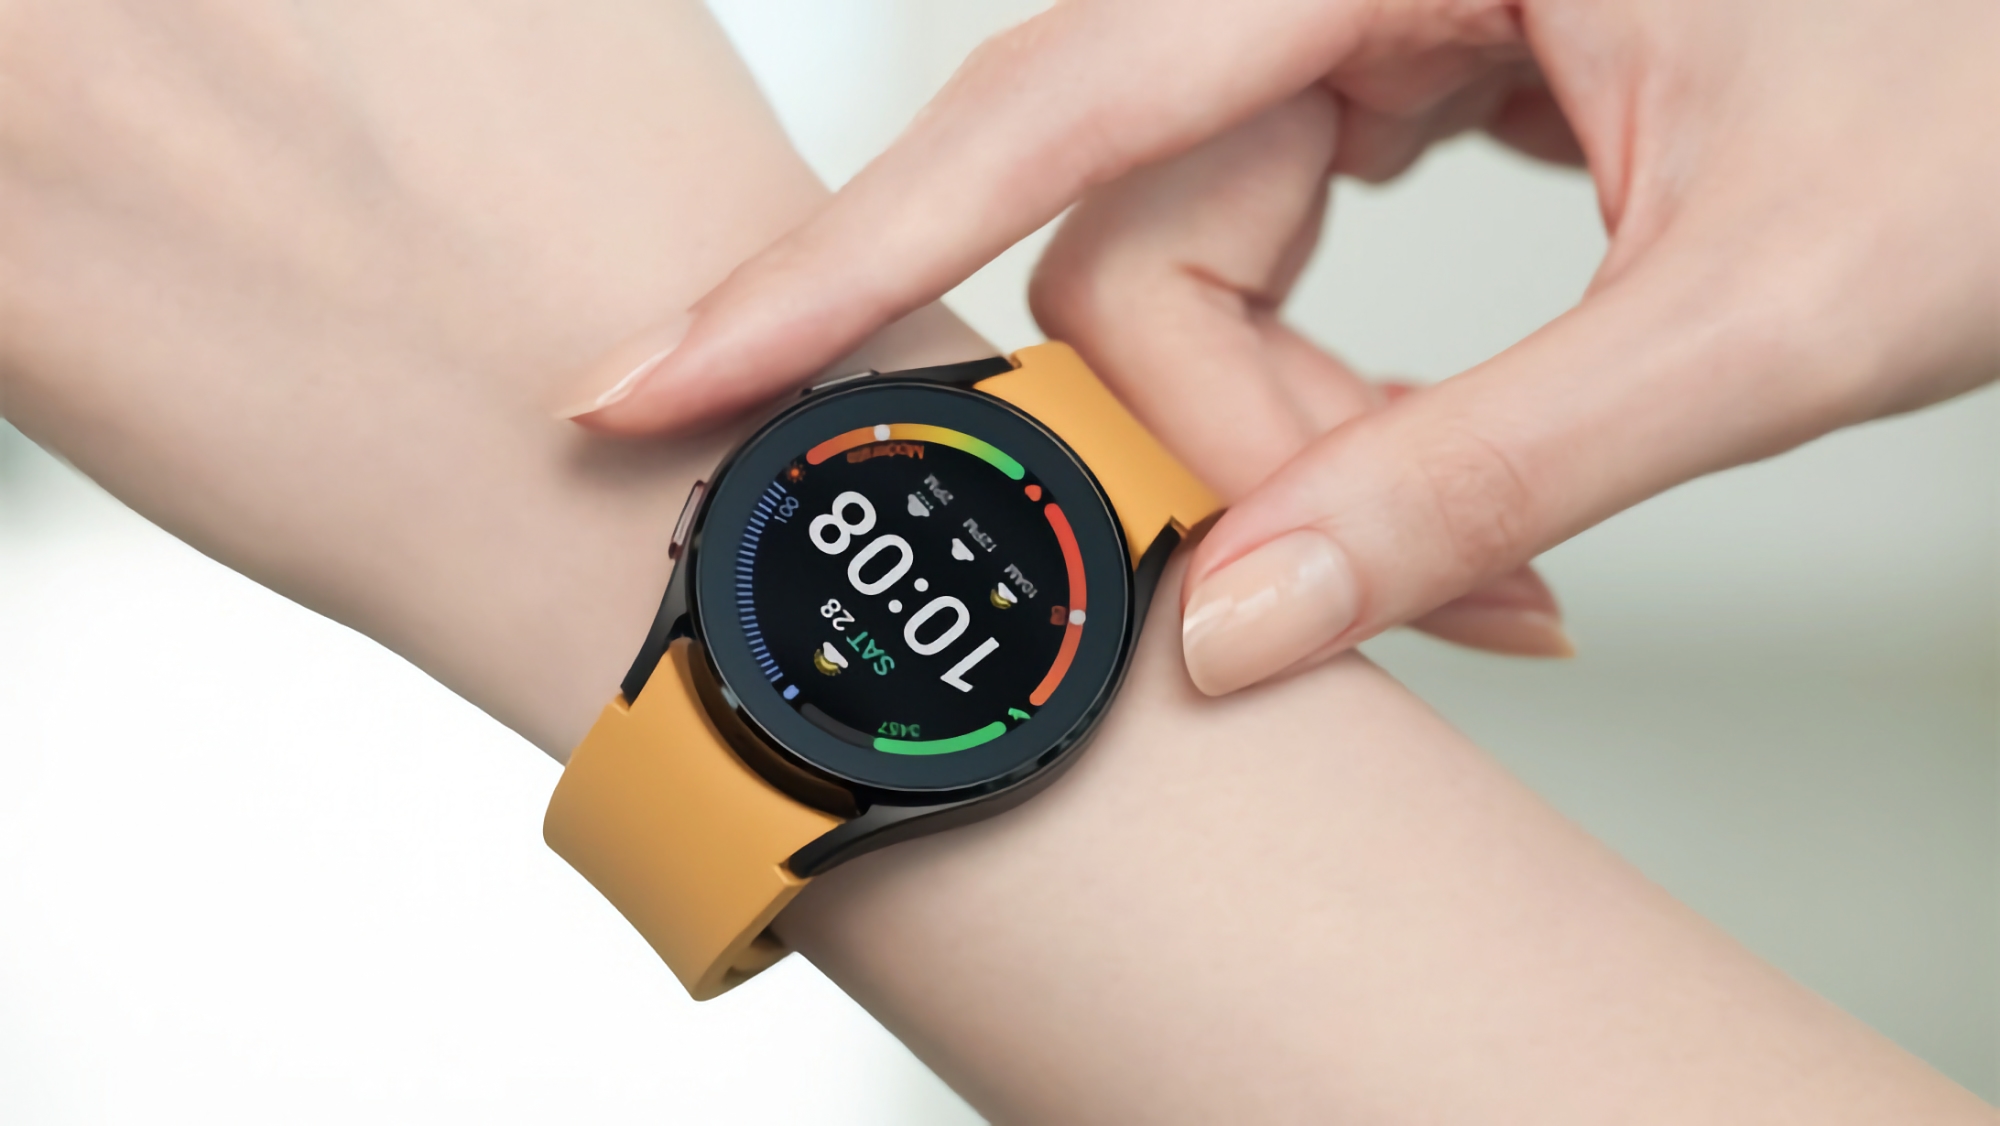 Samsung has released the fourth beta version of One UI 5 Watch for Galaxy Watch 4 and Galaxy Watch 5